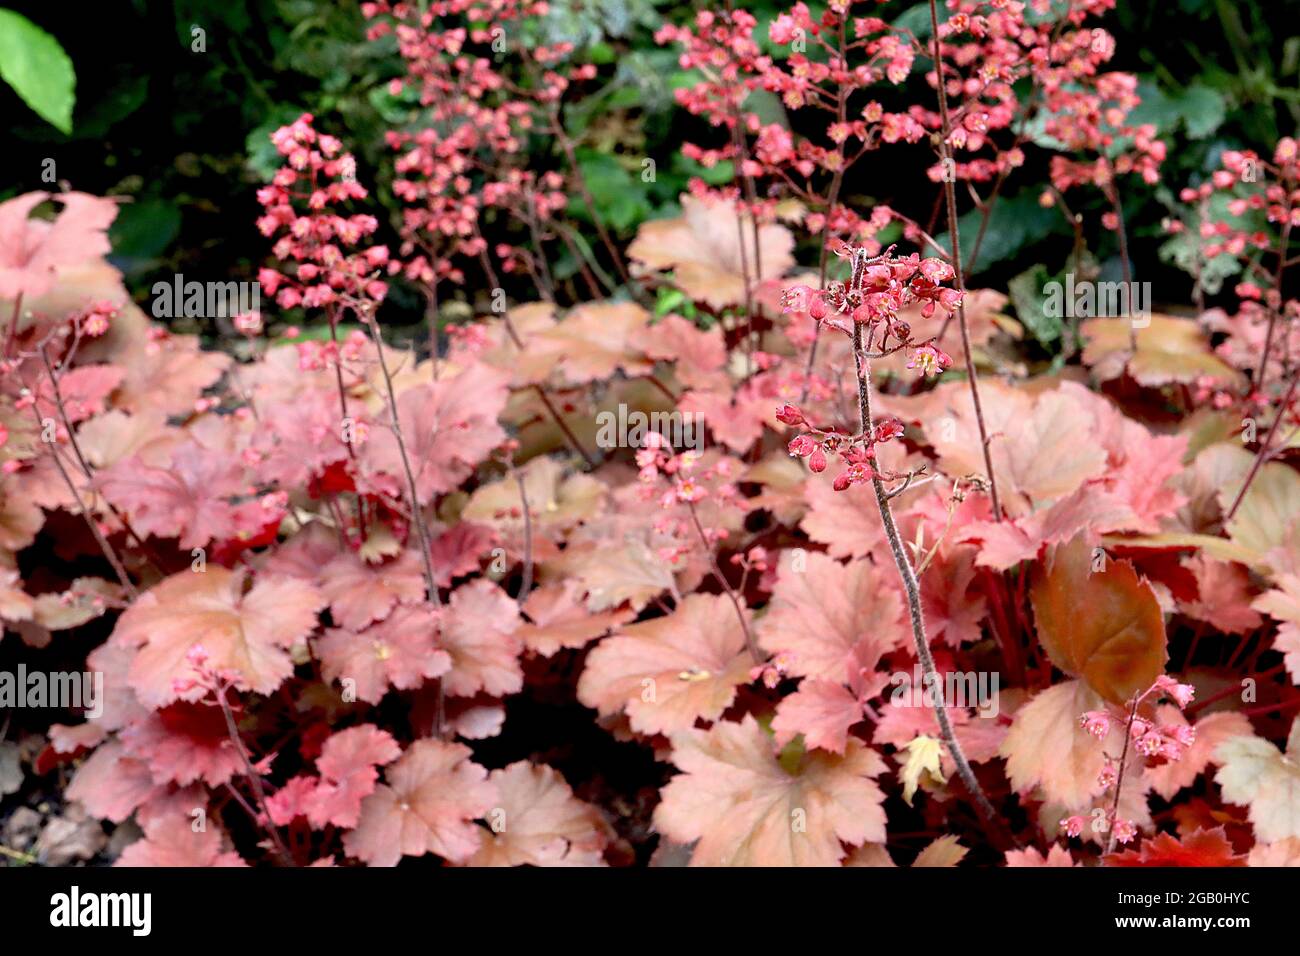 Heuchera ‘Apricot’ Alum root / coral bells Apricot - small tubular deep pink flowers and apricot and russet round palmate leaves, June, England, UK Stock Photo